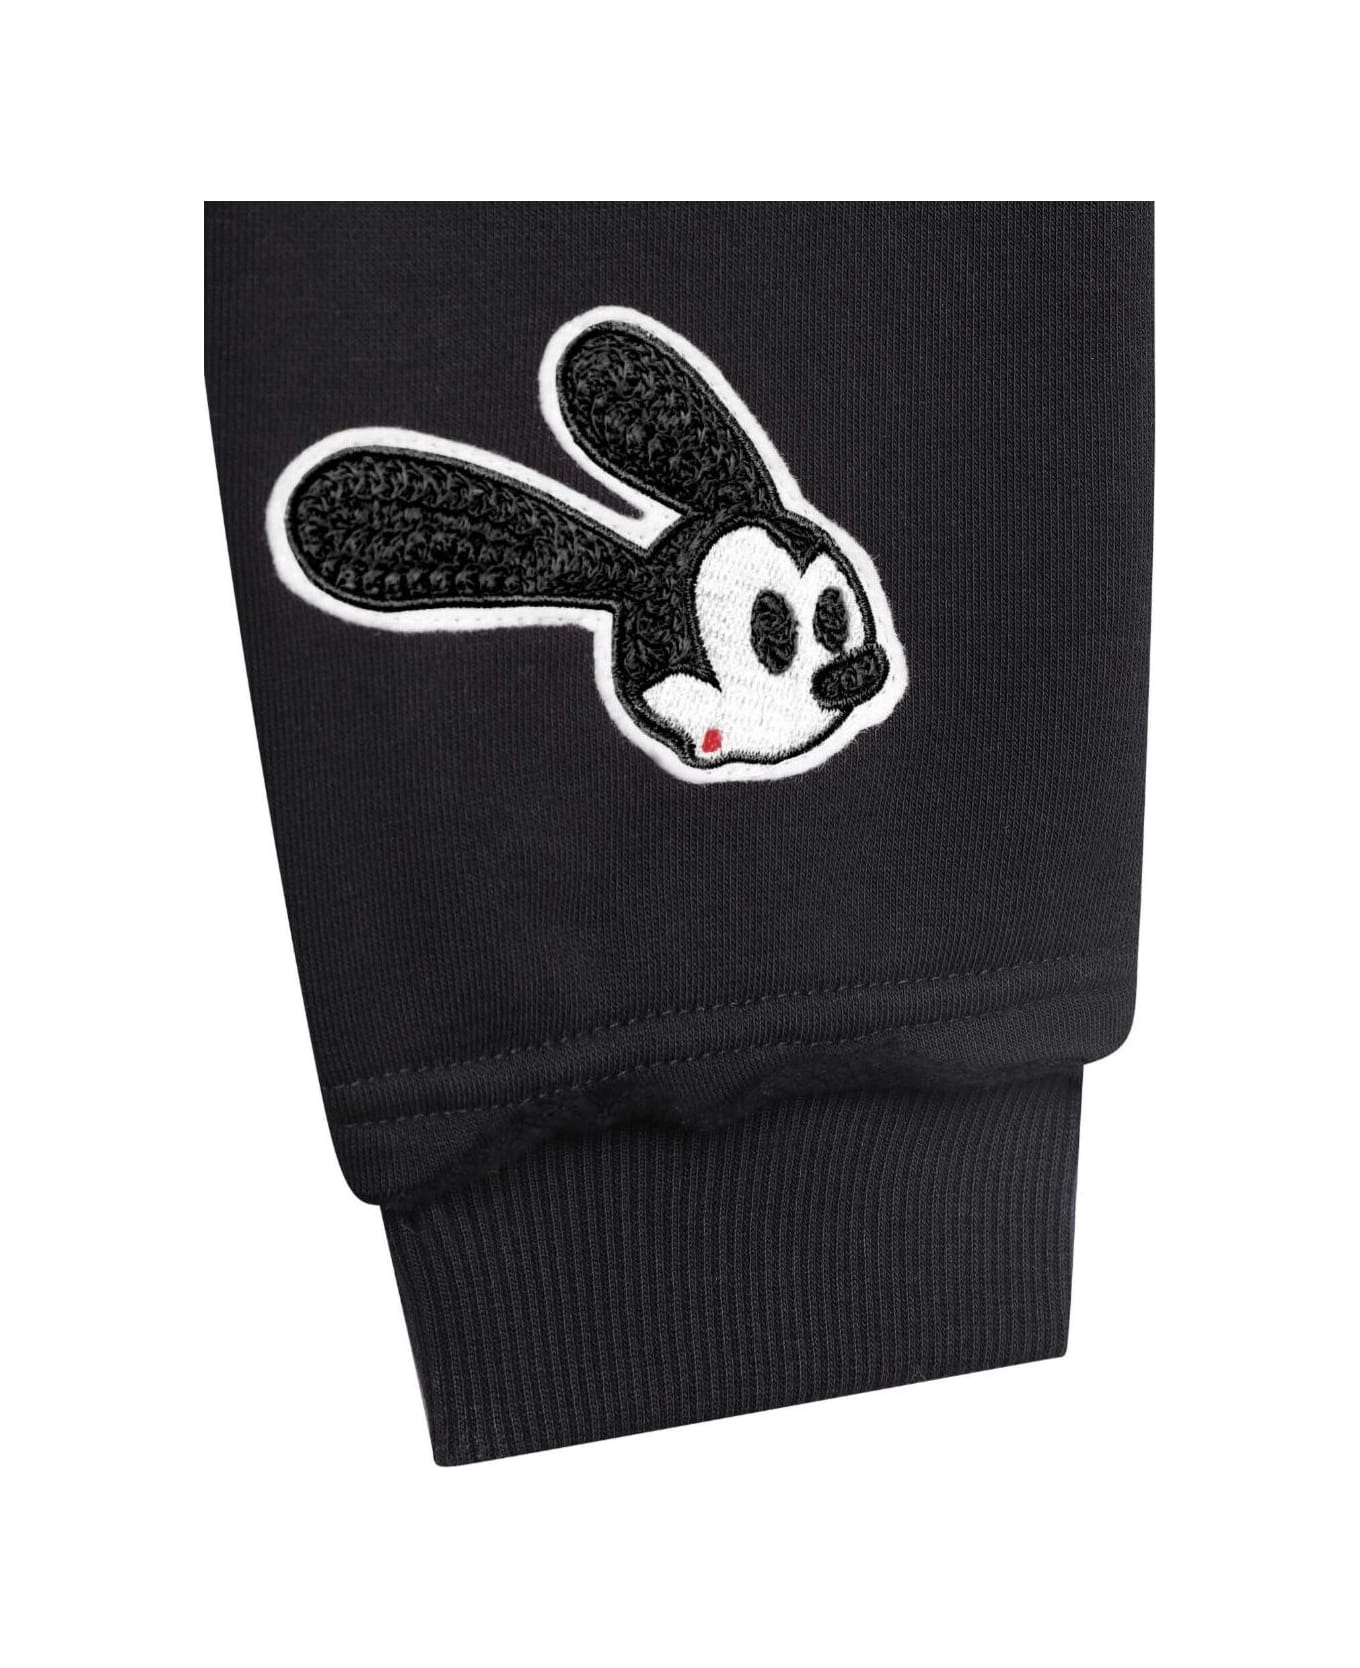 Givenchy Black Track Pants With 'oswald X Disney' Patch In Cotton Blend Girl - Black ボトムス